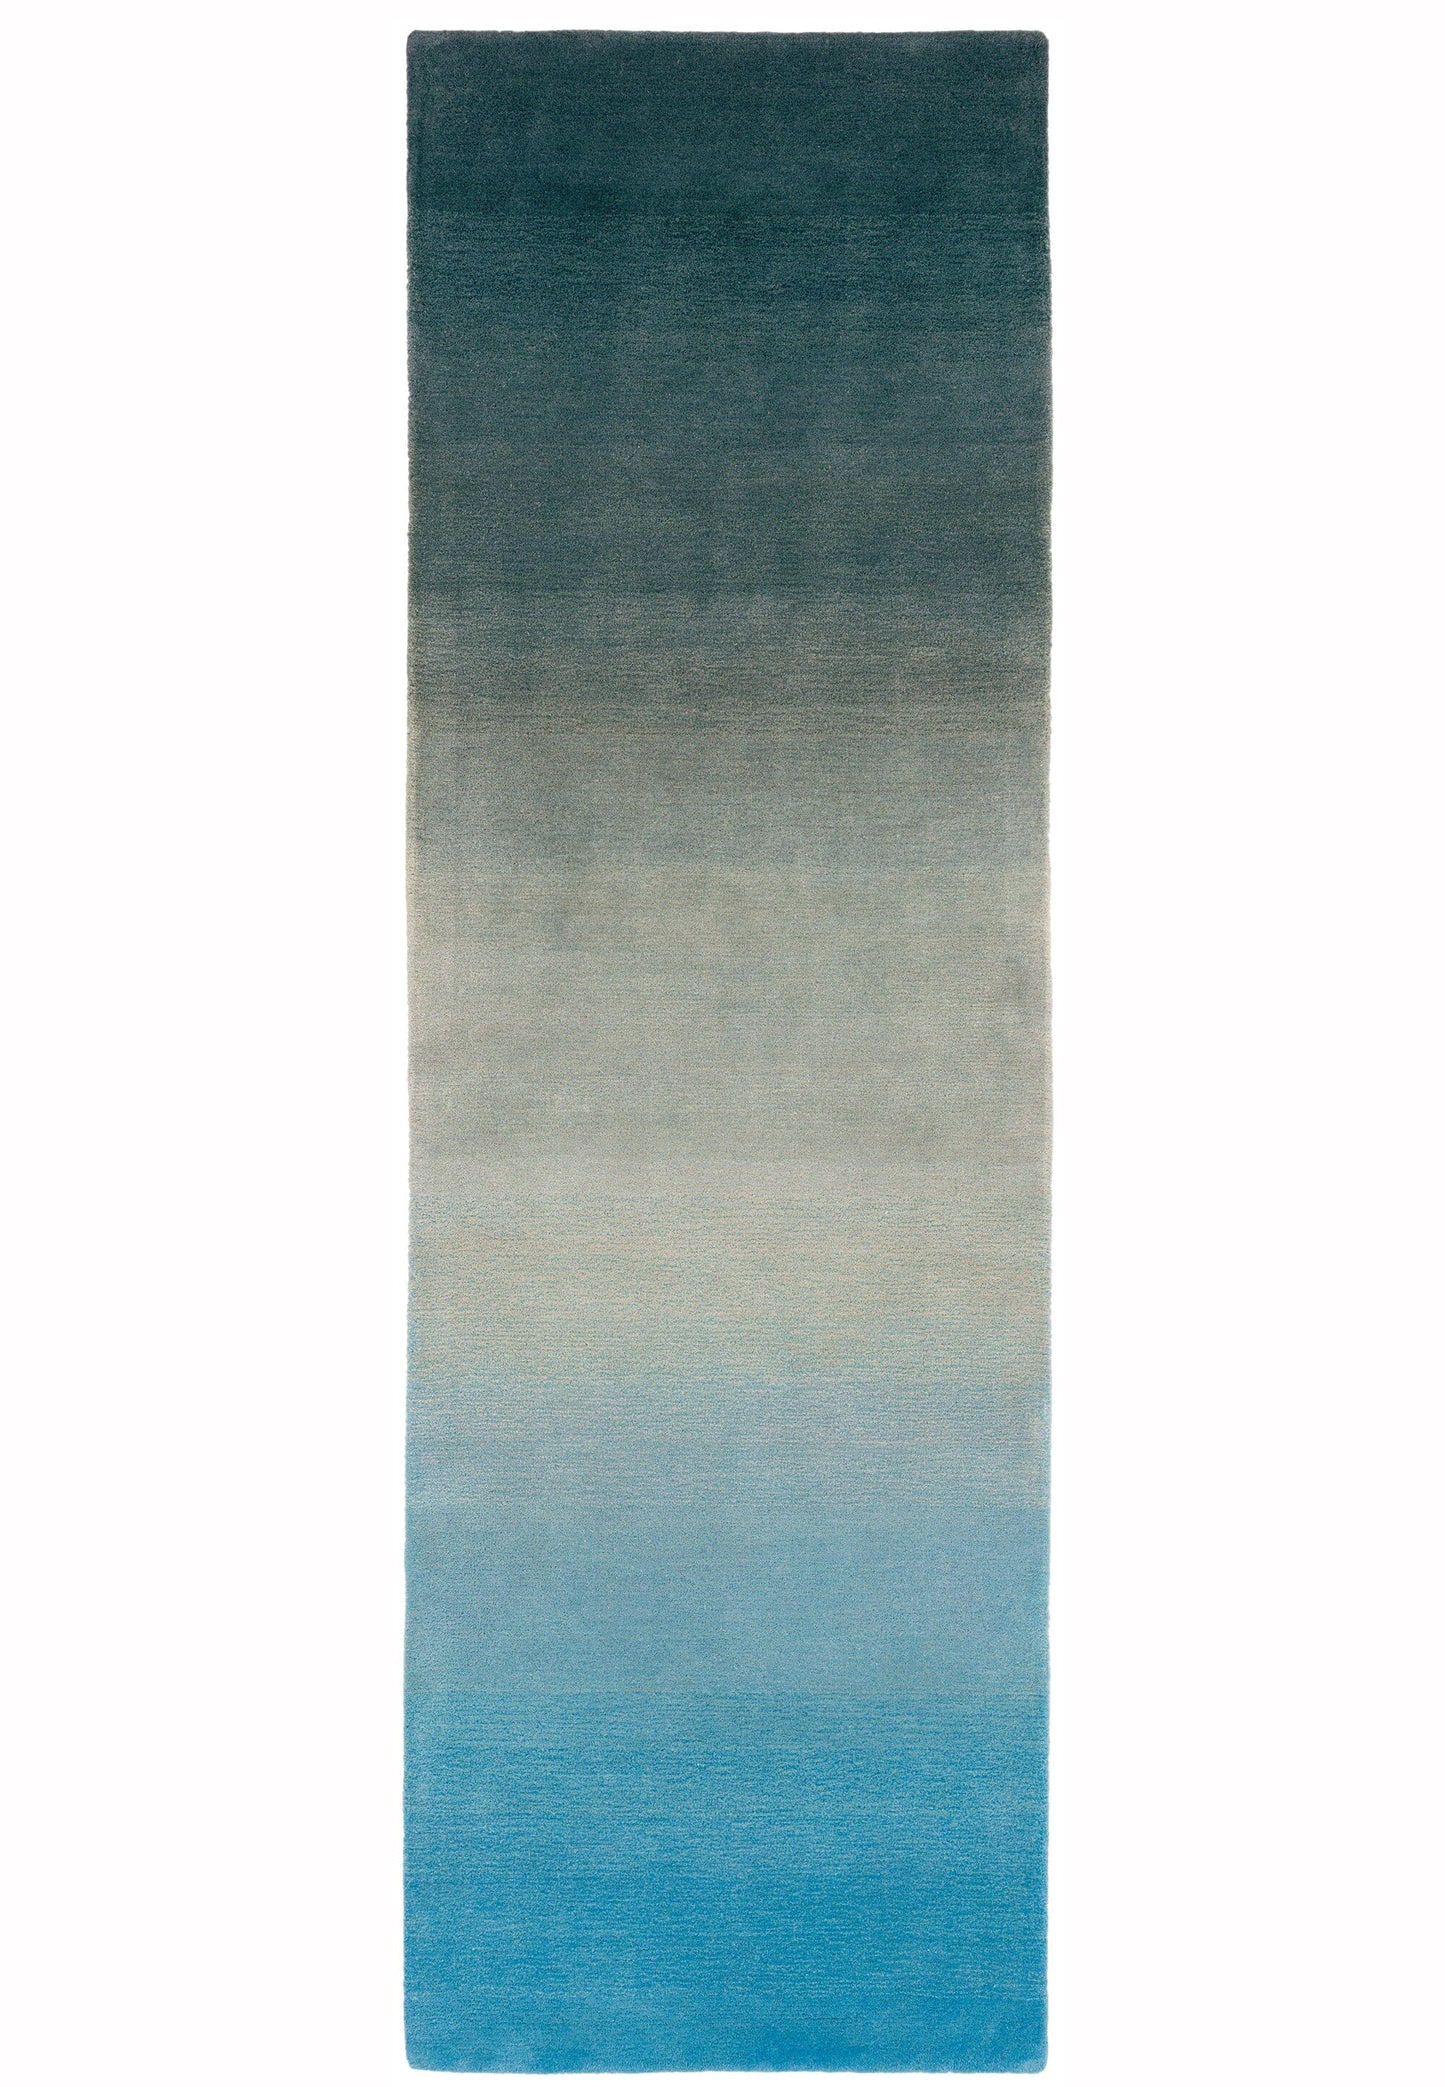 Asiatic Carpets Ombre Hand Tufted Runner Blue - 70 x 240cm